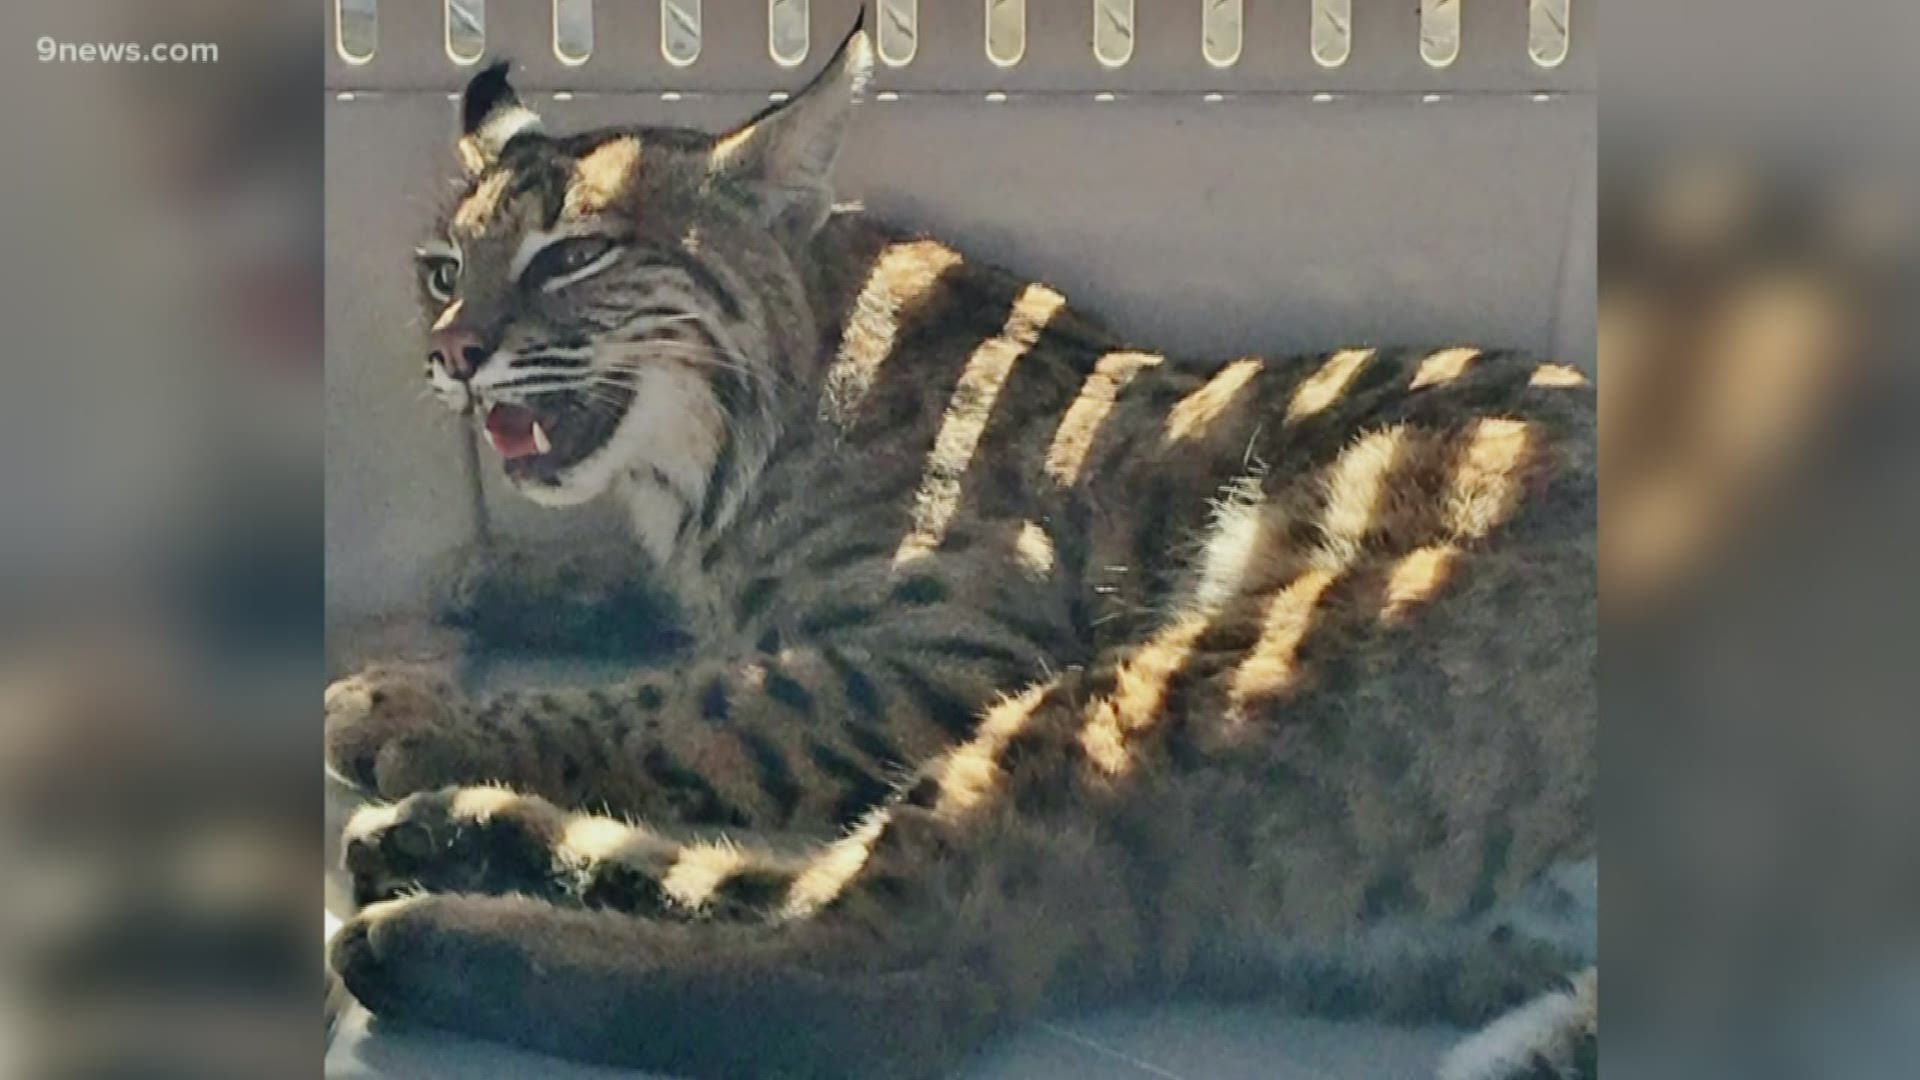 A Colorado Springs woman won't be cited after putting an injured bobcat in her SUV.